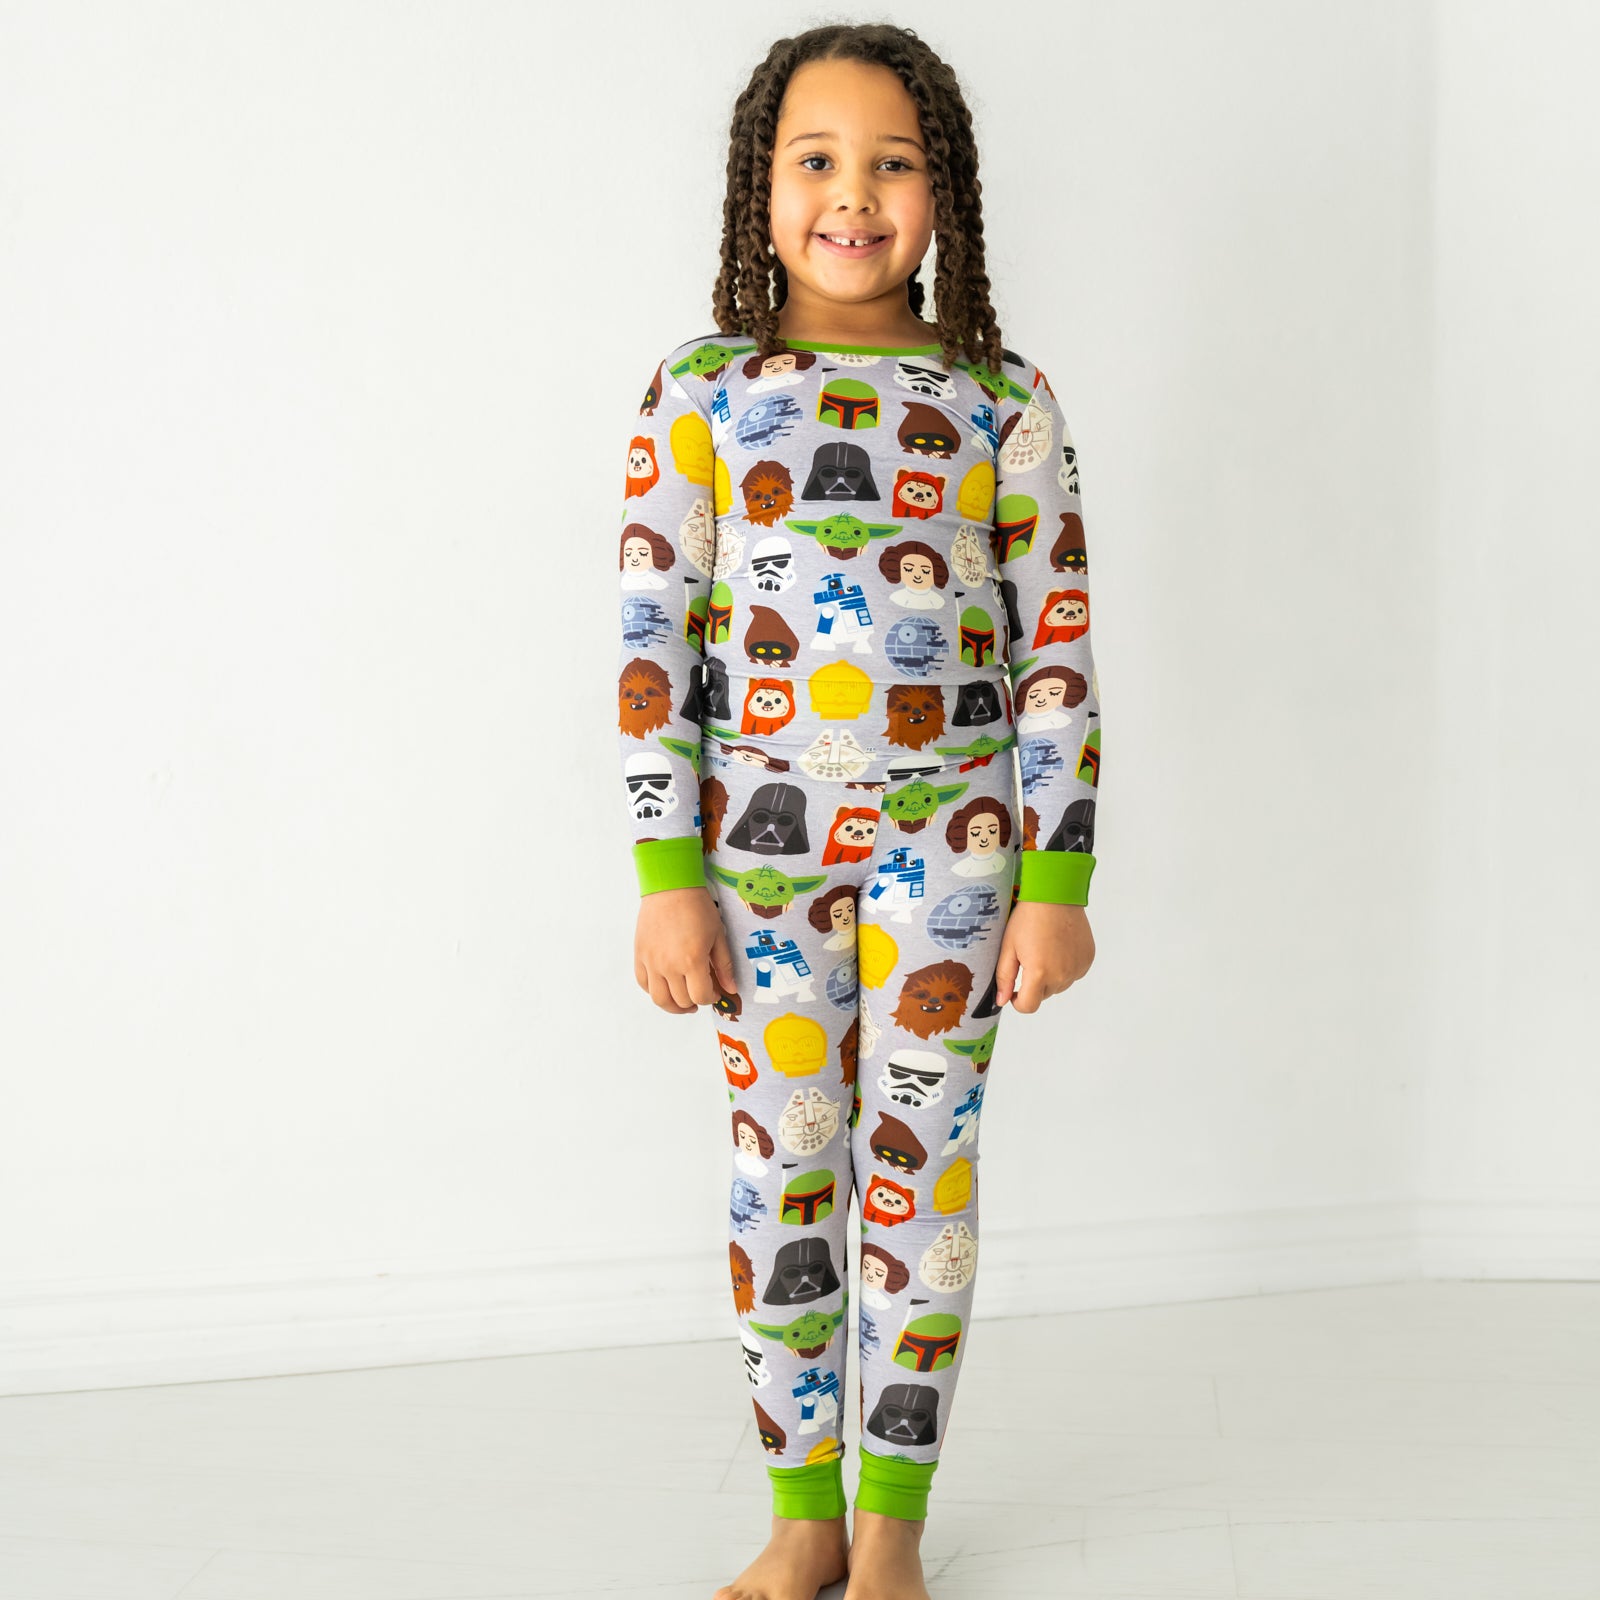 Child wearing a Legends of the Galaxy two-piece pajama set